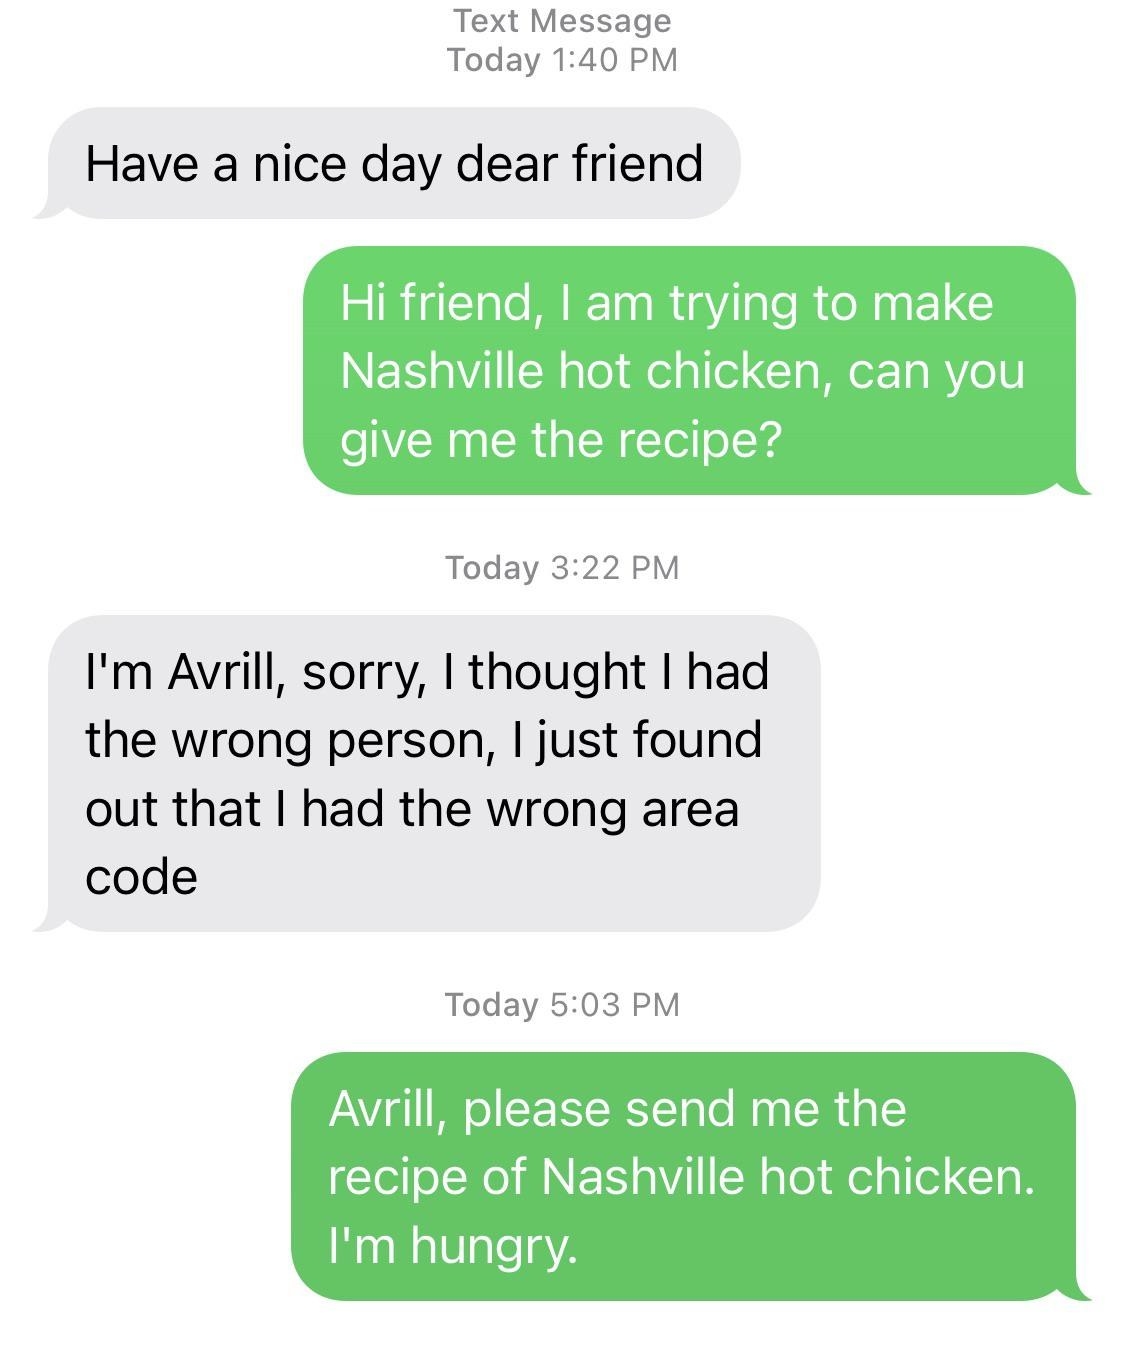 wrong number text of someone named avrill and the receiver asks for a chicken recipe quite strongly